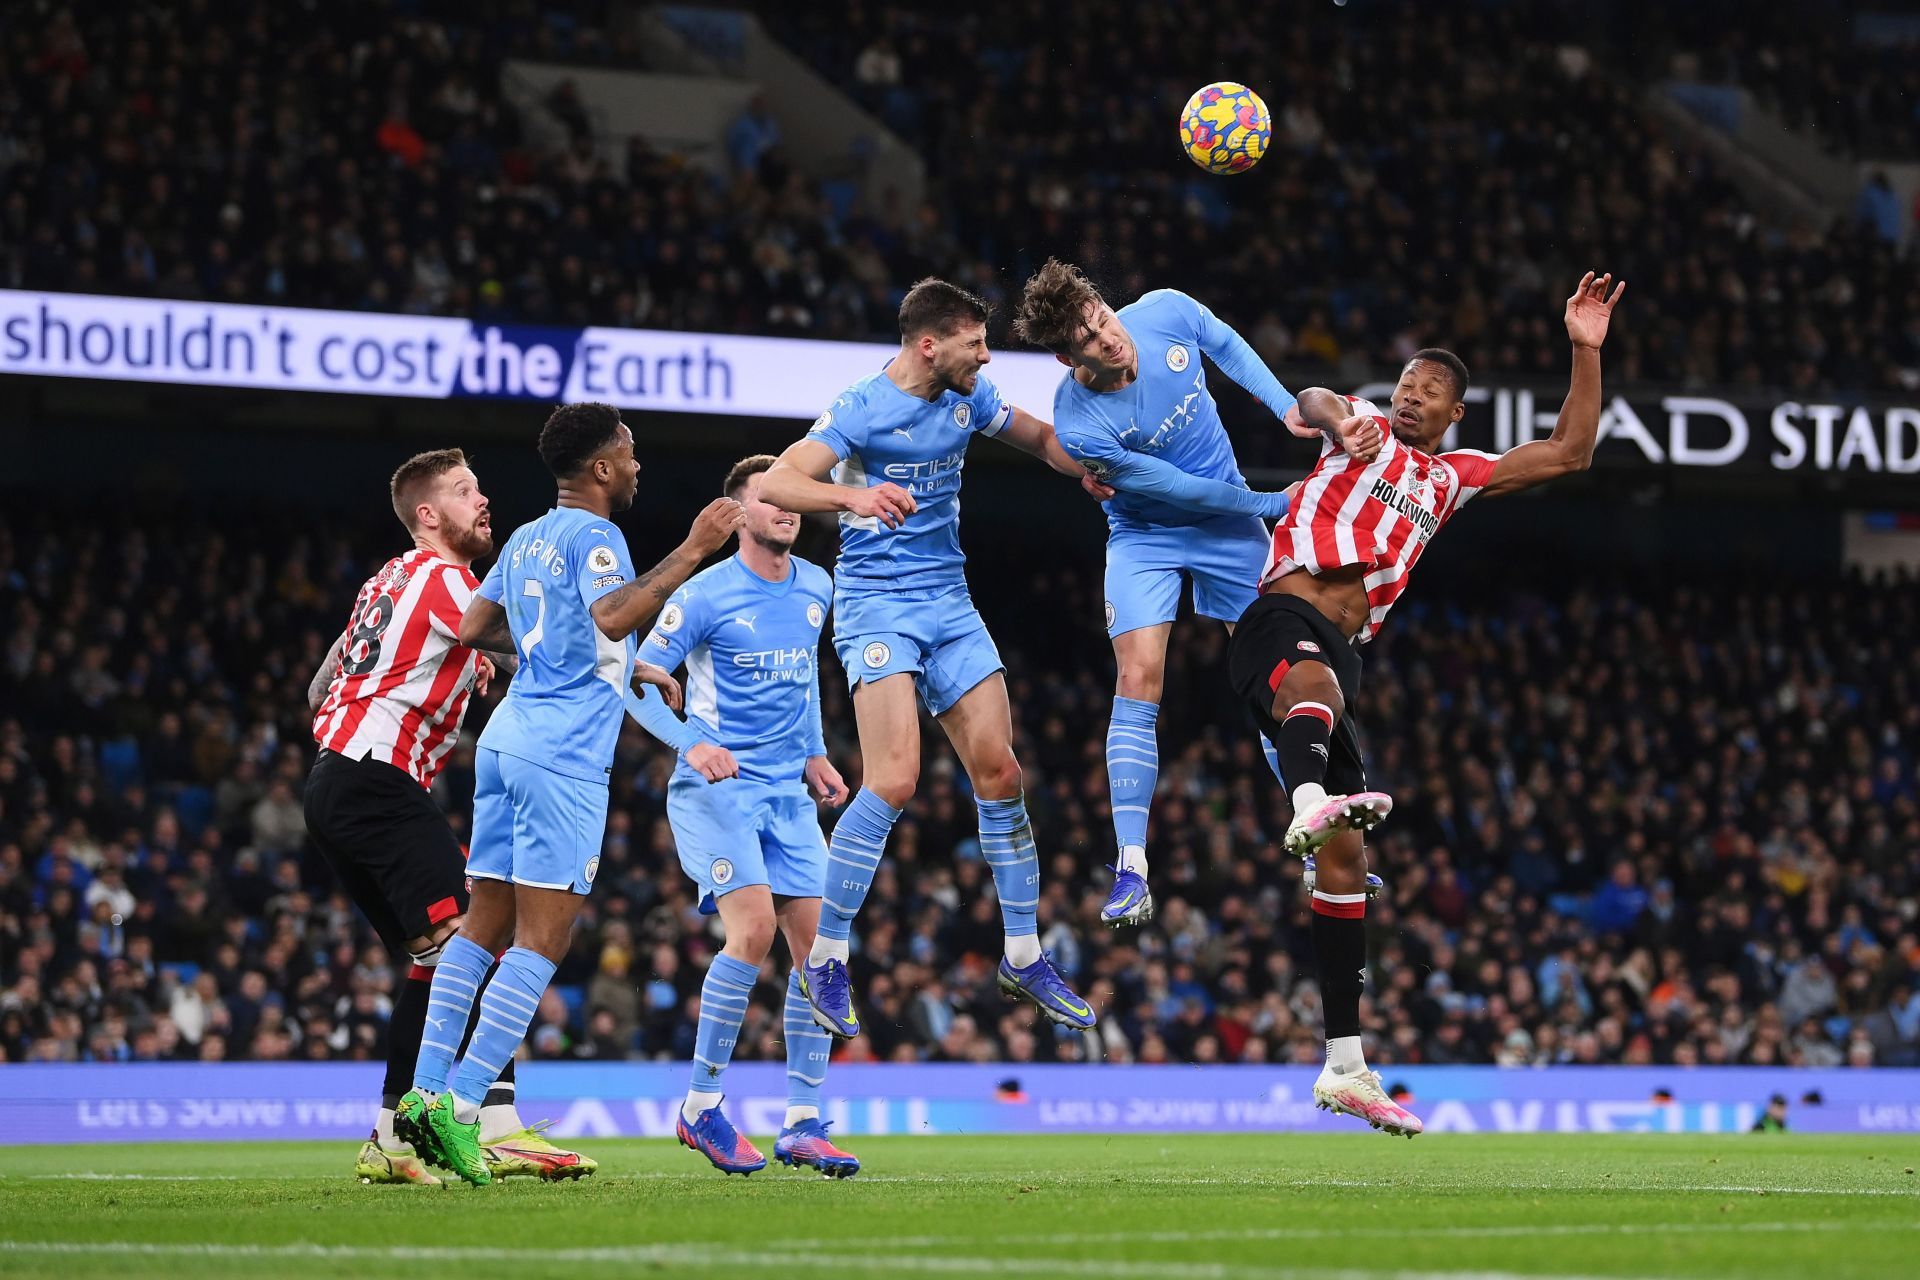 Manchester City defeated Brentford 2-0 on Wednesday